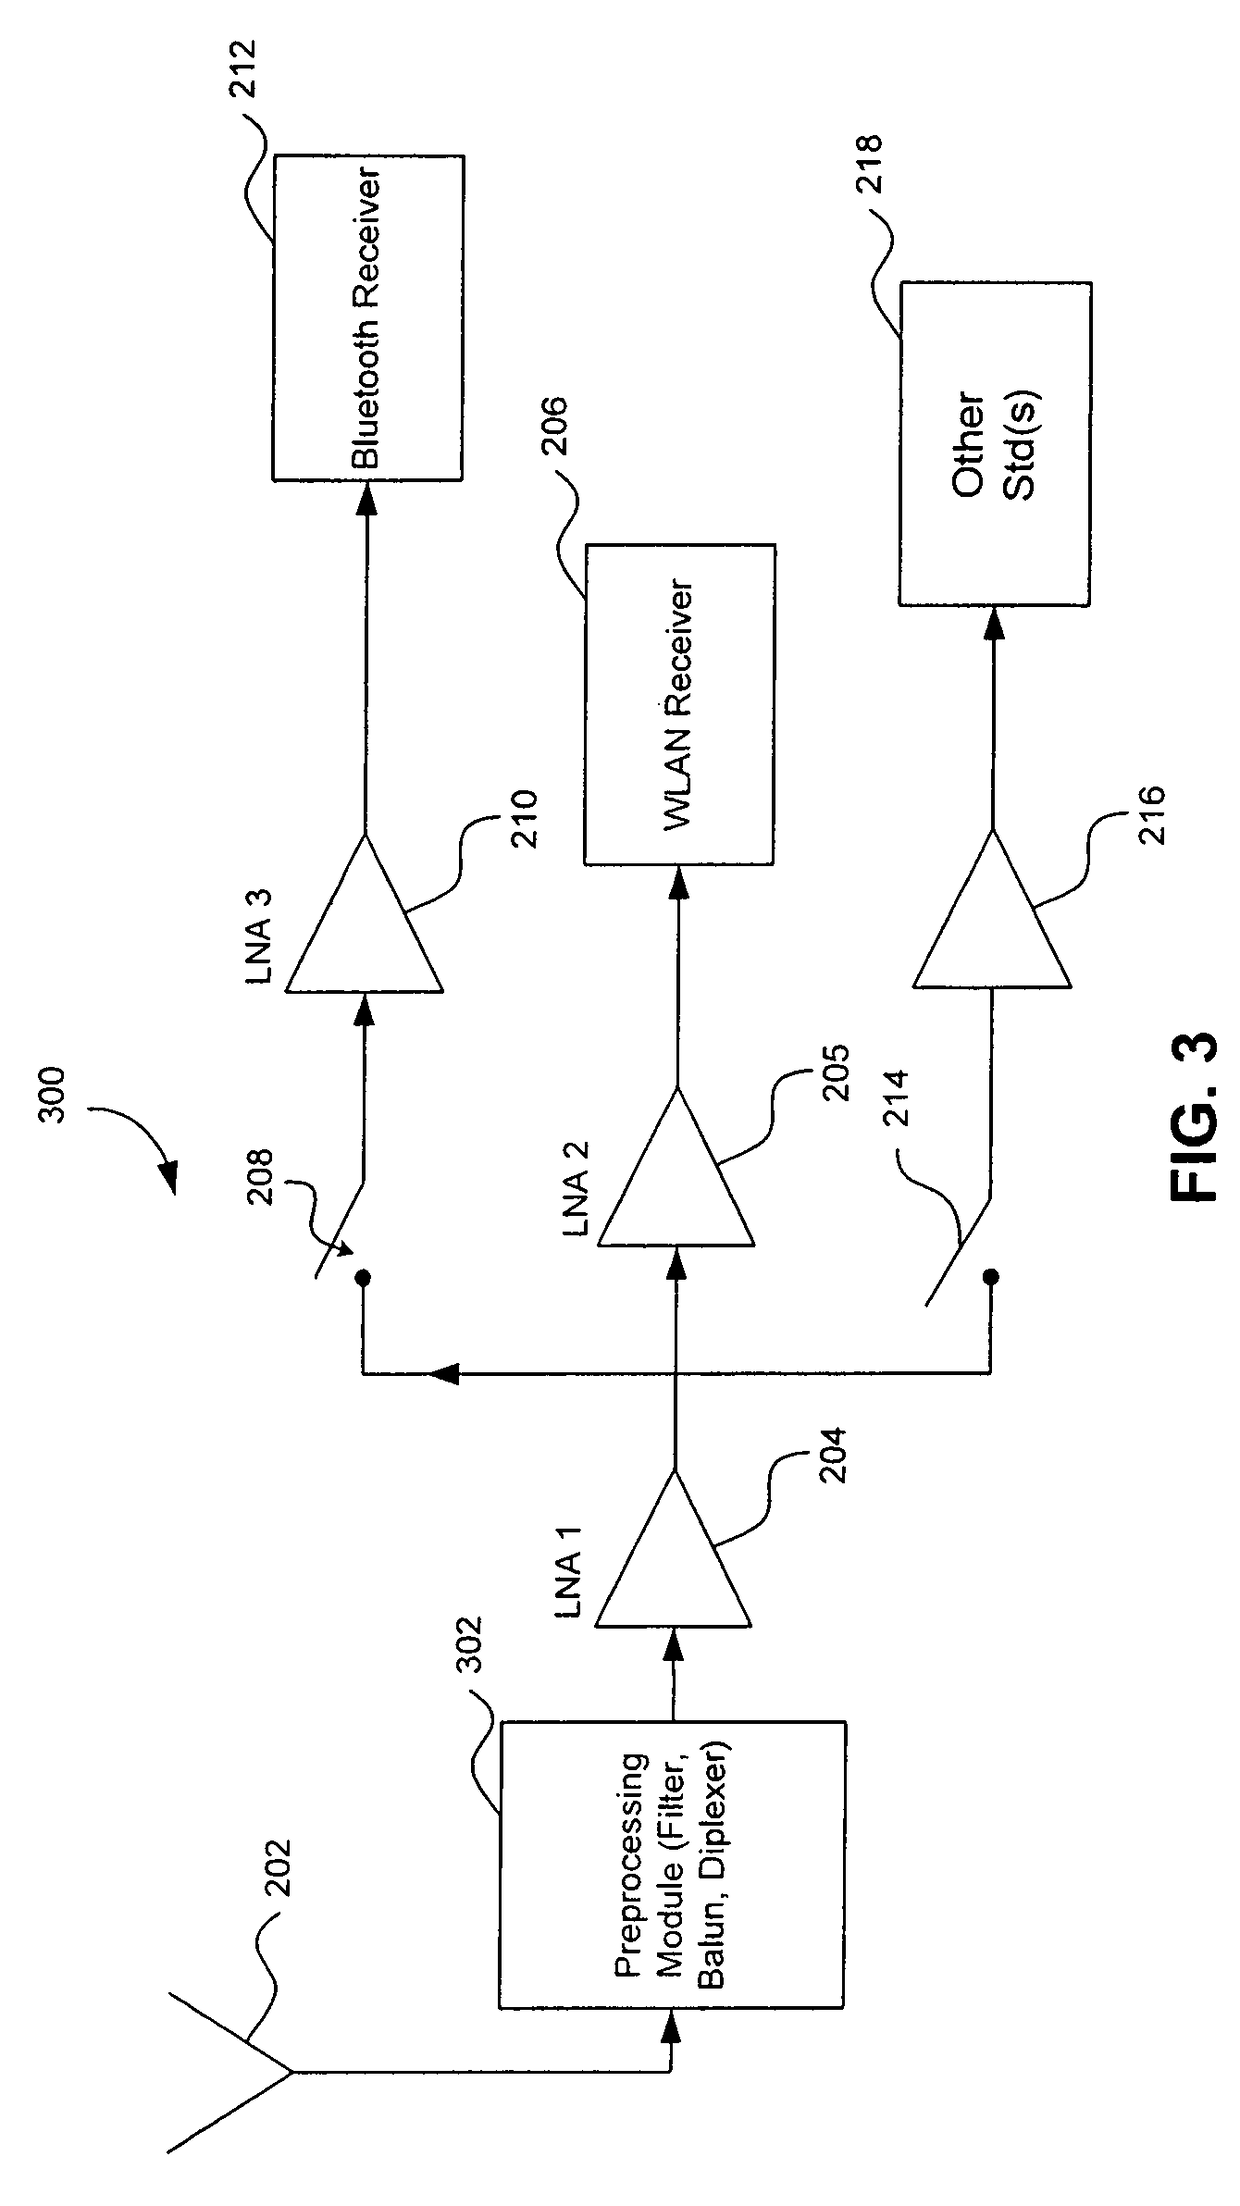 Radio receiver with shared low noise amplifier for multi-standard operation in a single antenna system with loft isolation and flexible gain control